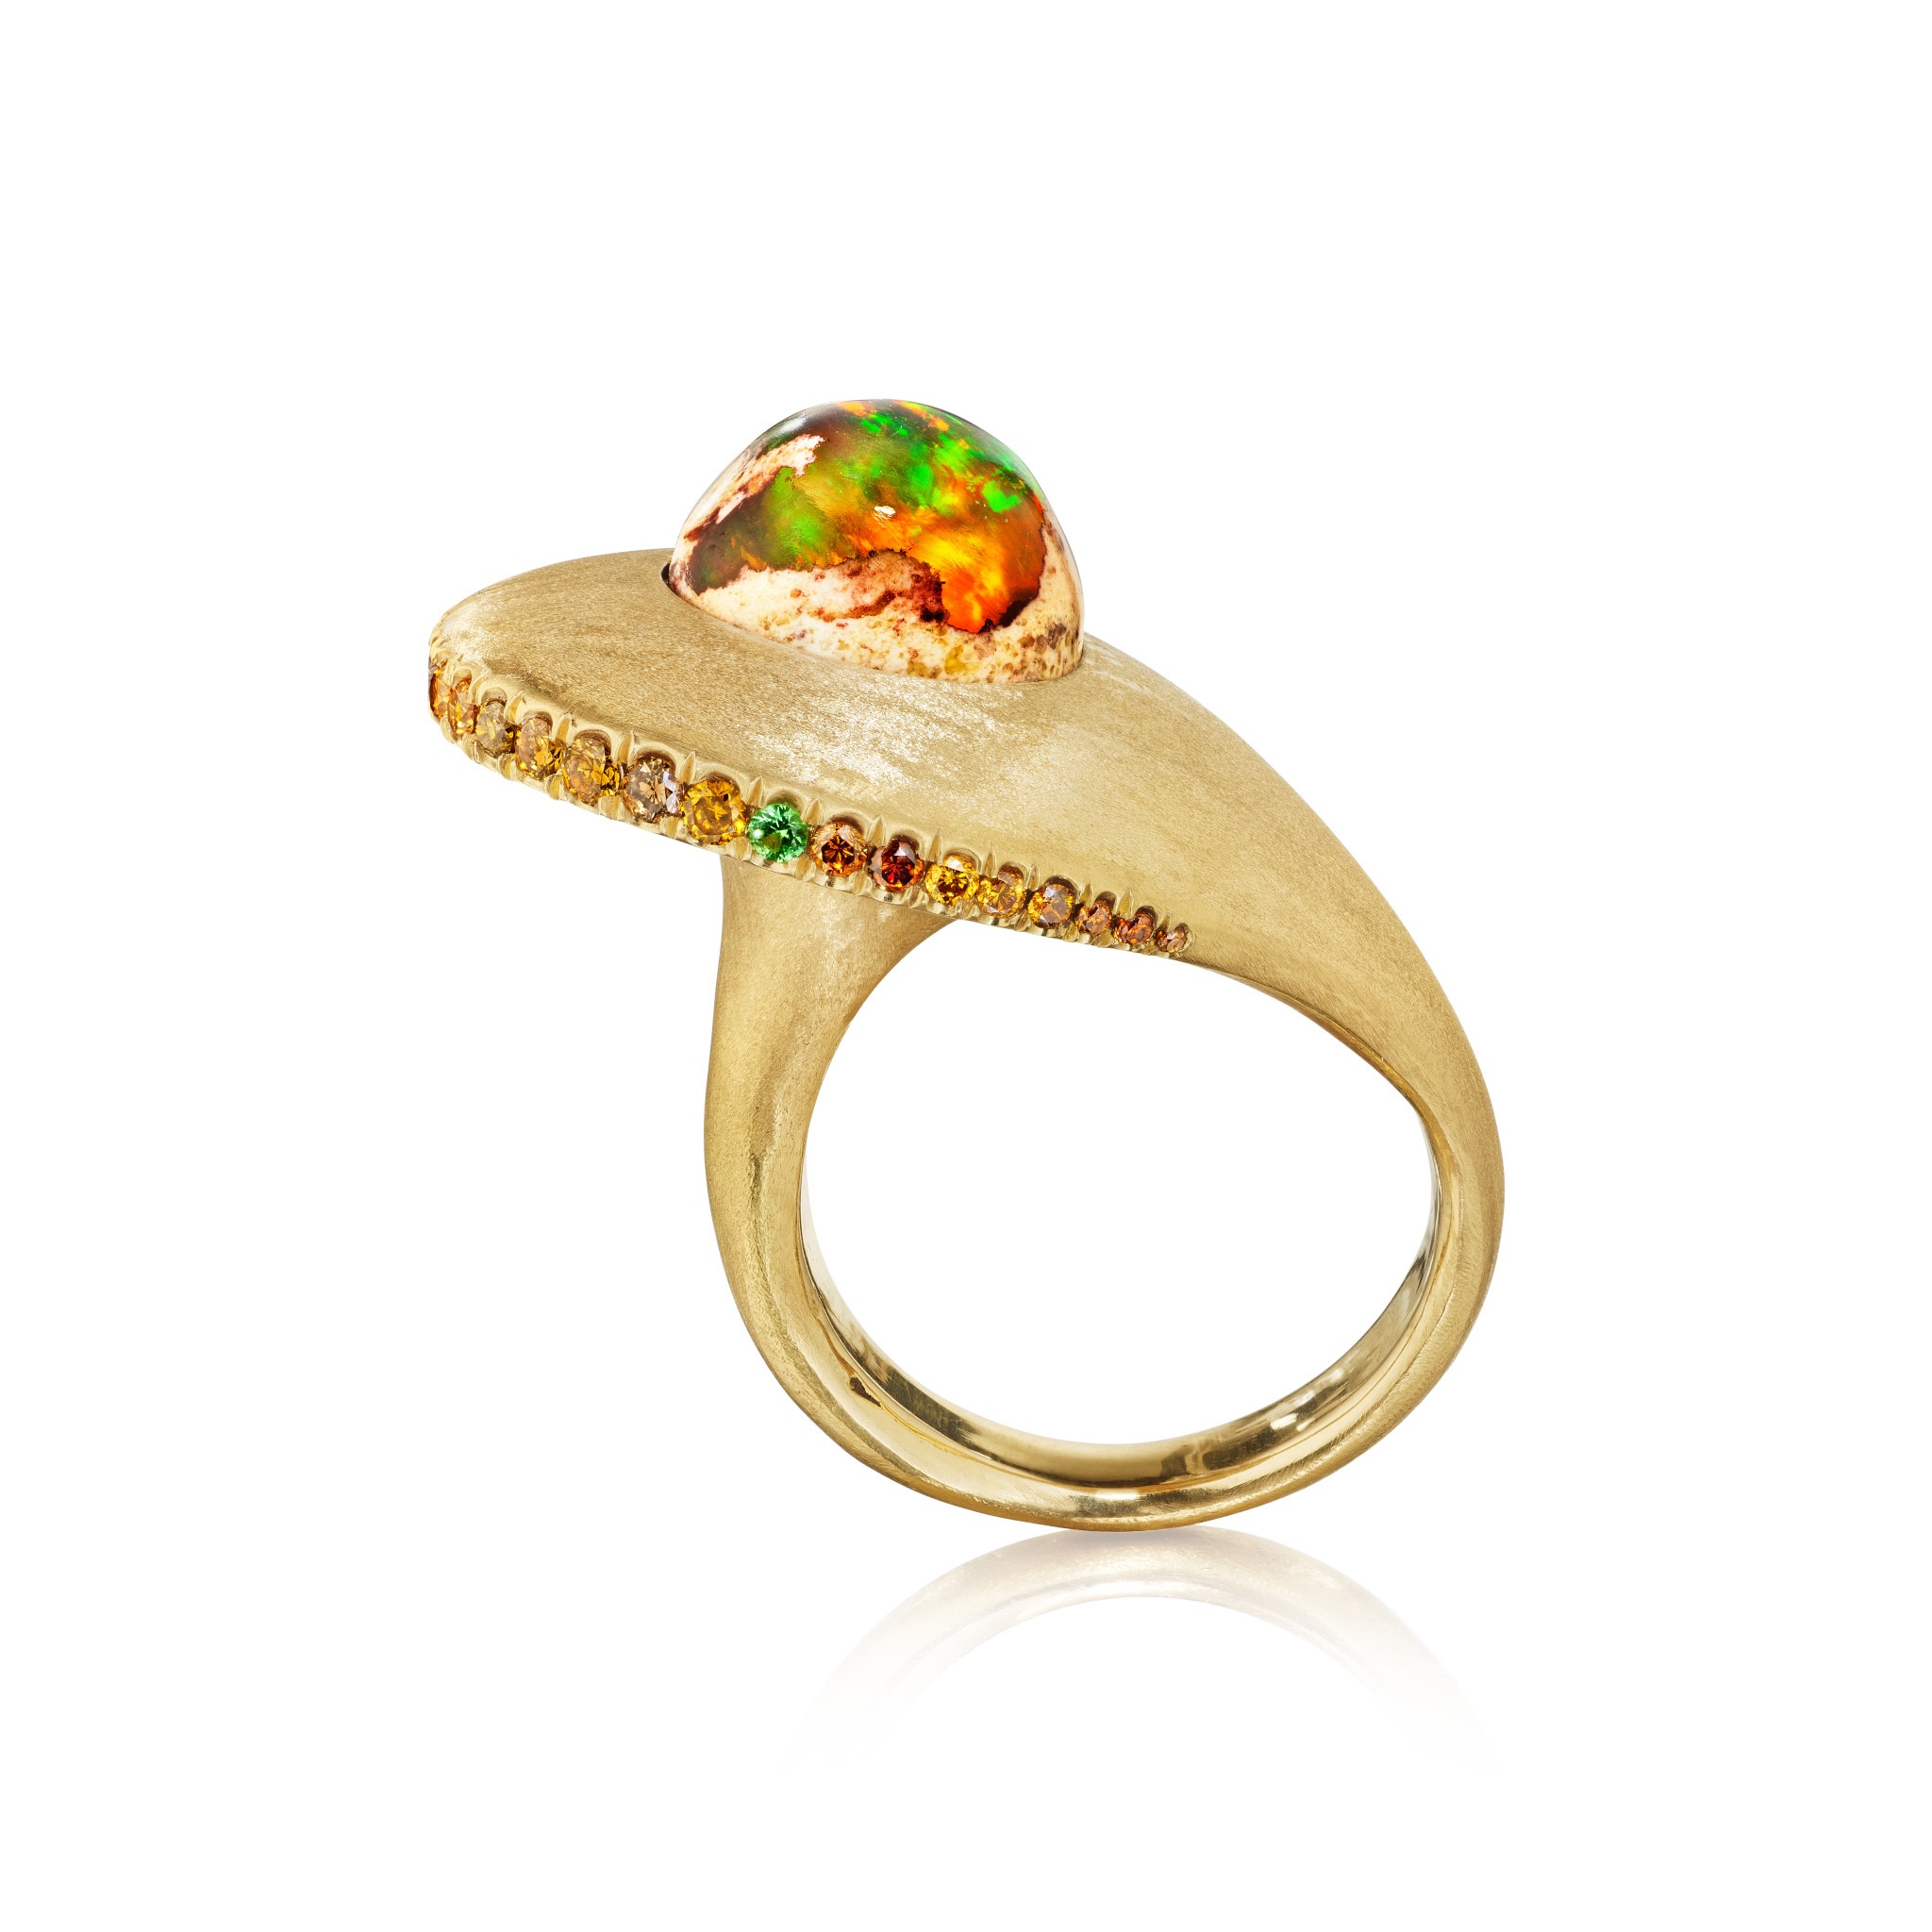 Yellow Gold Mexican Opal Ring with Tsavorite Garnet Accents - Dianna Rae  Jewelry